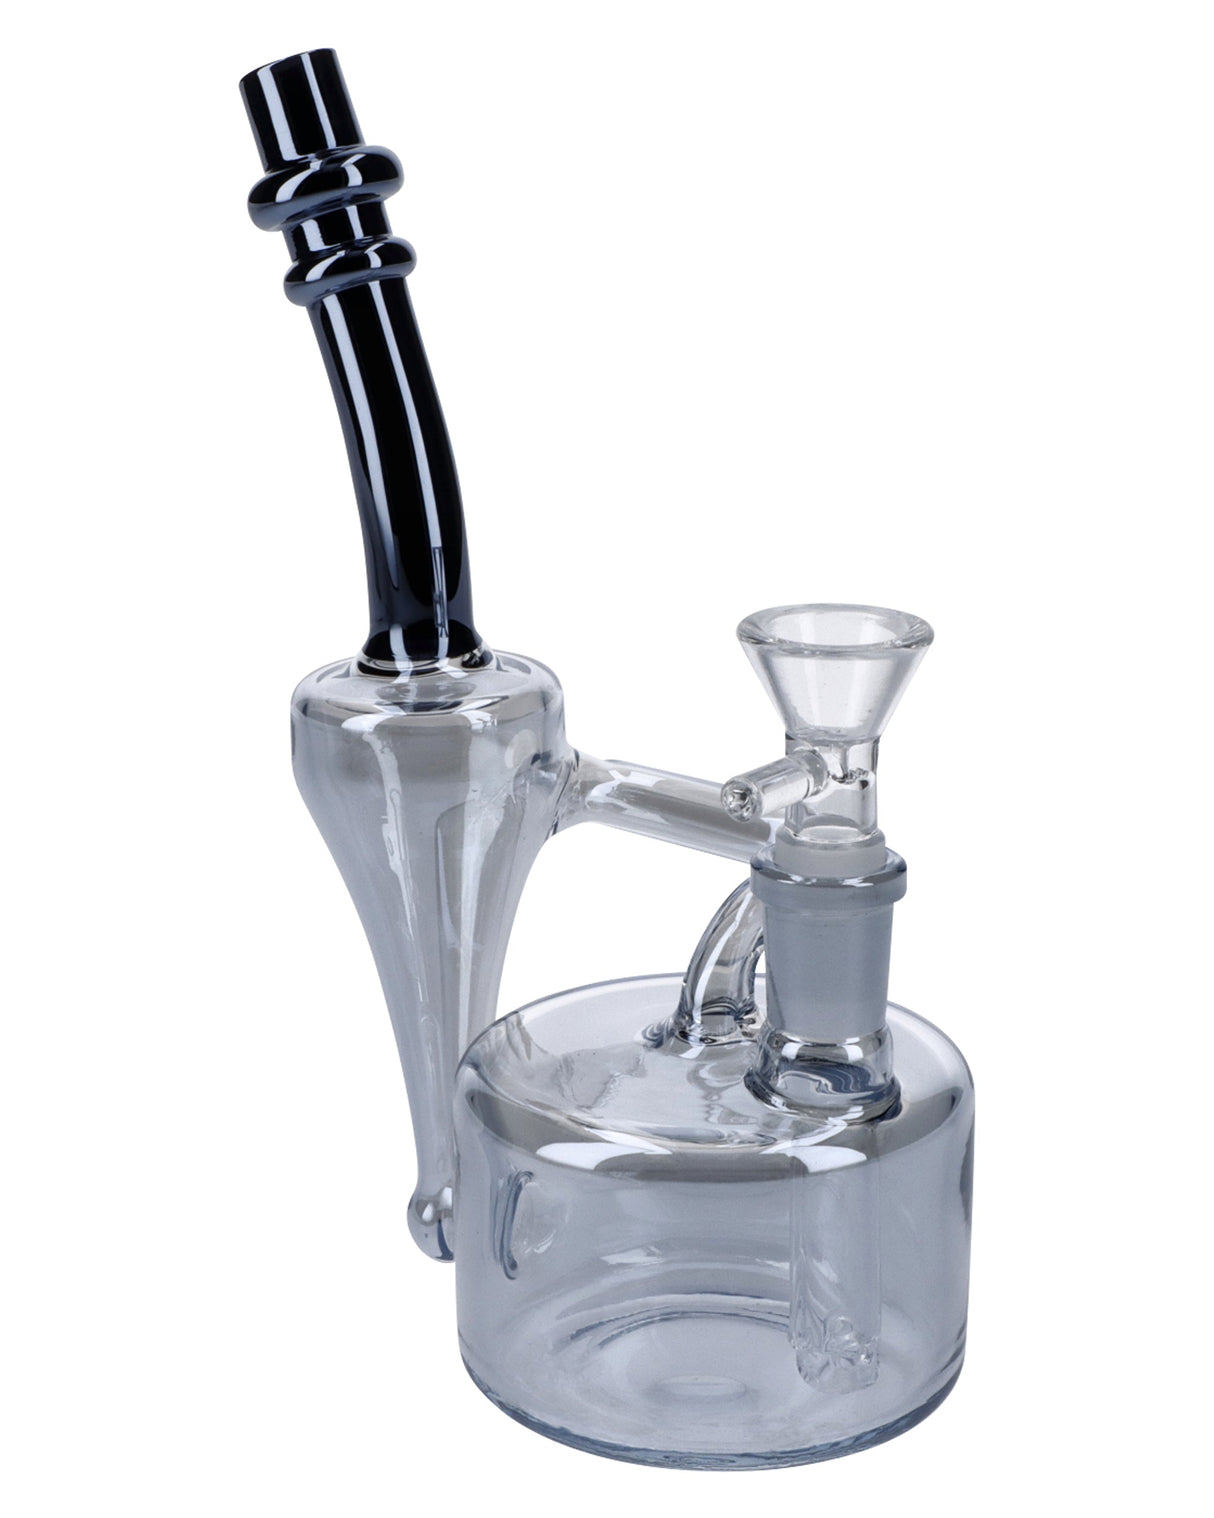 Valiant Painting Bubbler with Quartz Bowl - Clear and Black - 6in Side View